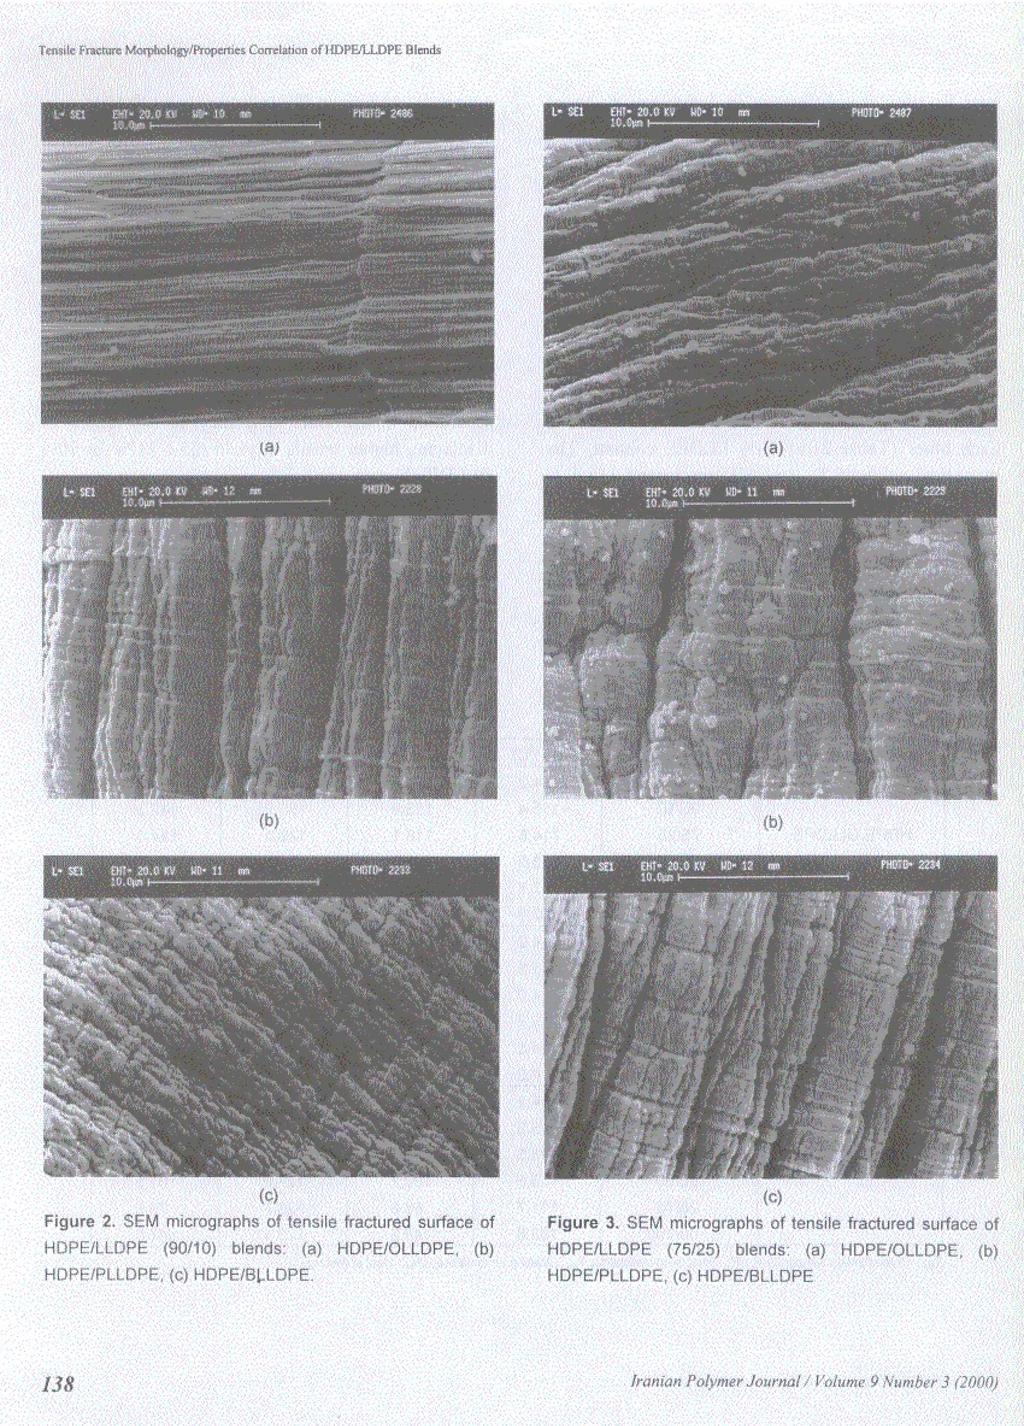 "- rphotngylf7openies Correlation of ] 1DPEJLLDPE DIends dt 8d 20.0 a S. w nu. MI2. 2186 (a) (b) (c) Figure 2. SEM micrographs of tensile fractured surface of Figure 3. SEM microgiapf.